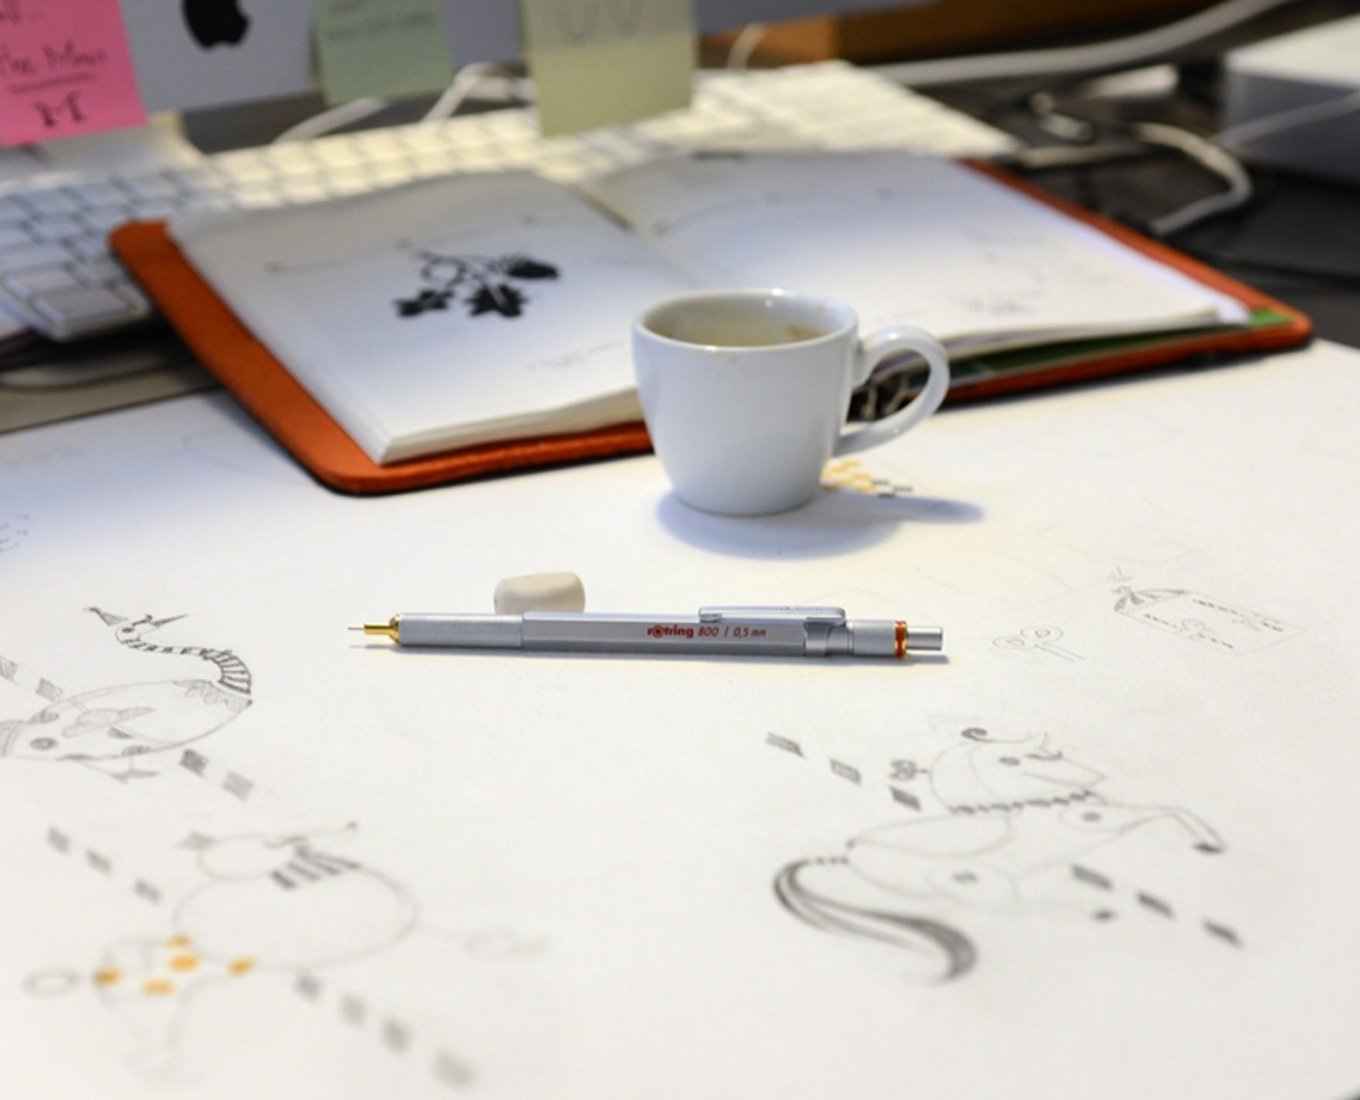 An 800 mechanical pencil next to an espresso cup laid over paper with doodles on it